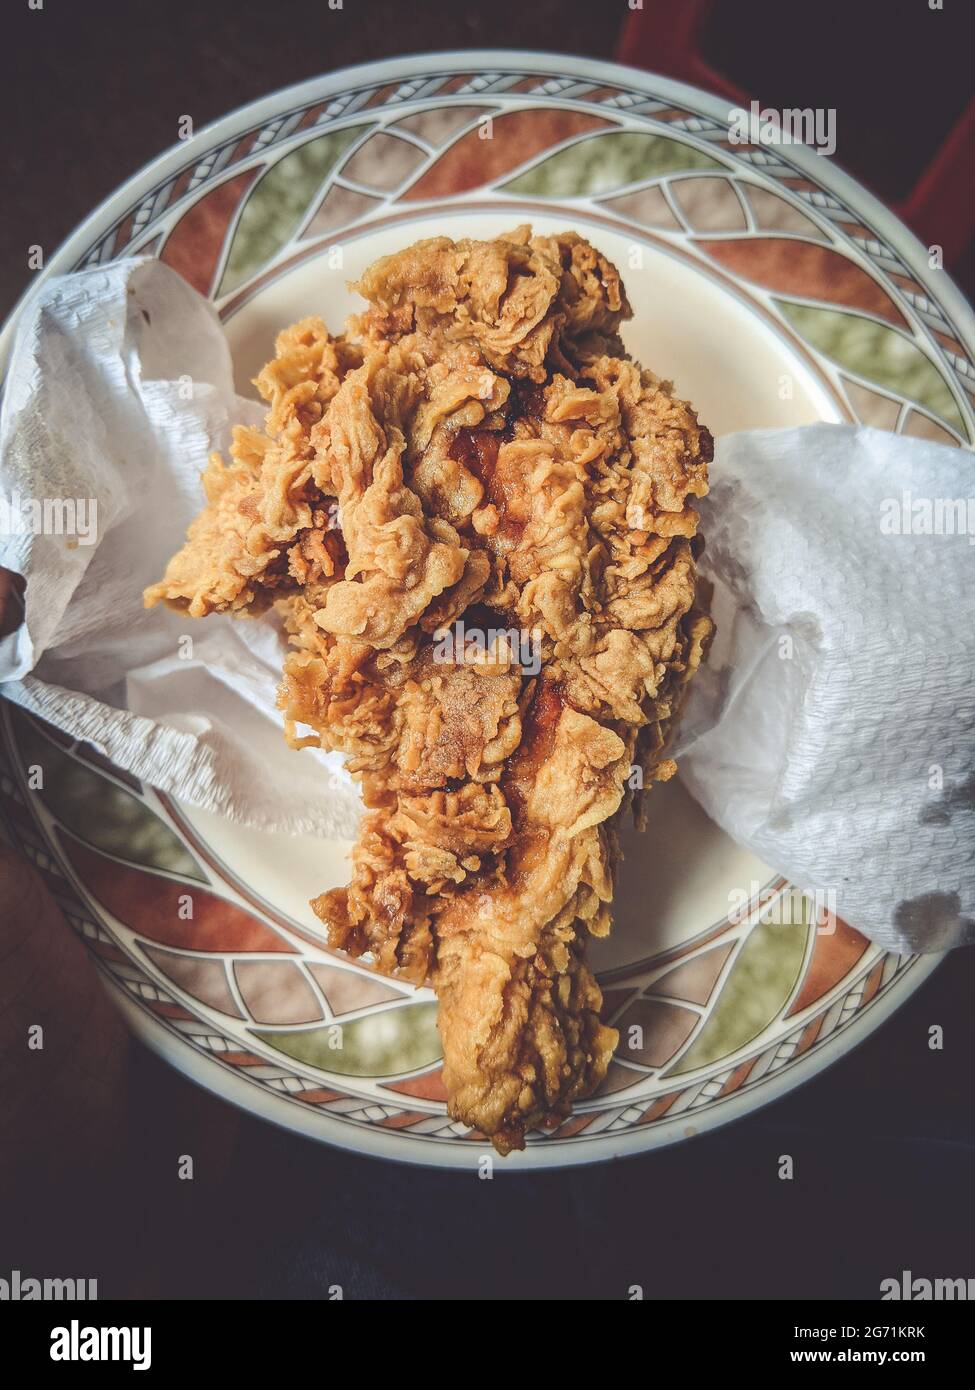 Top view of a newly cooked fried chicken served on a plate Stock Photo